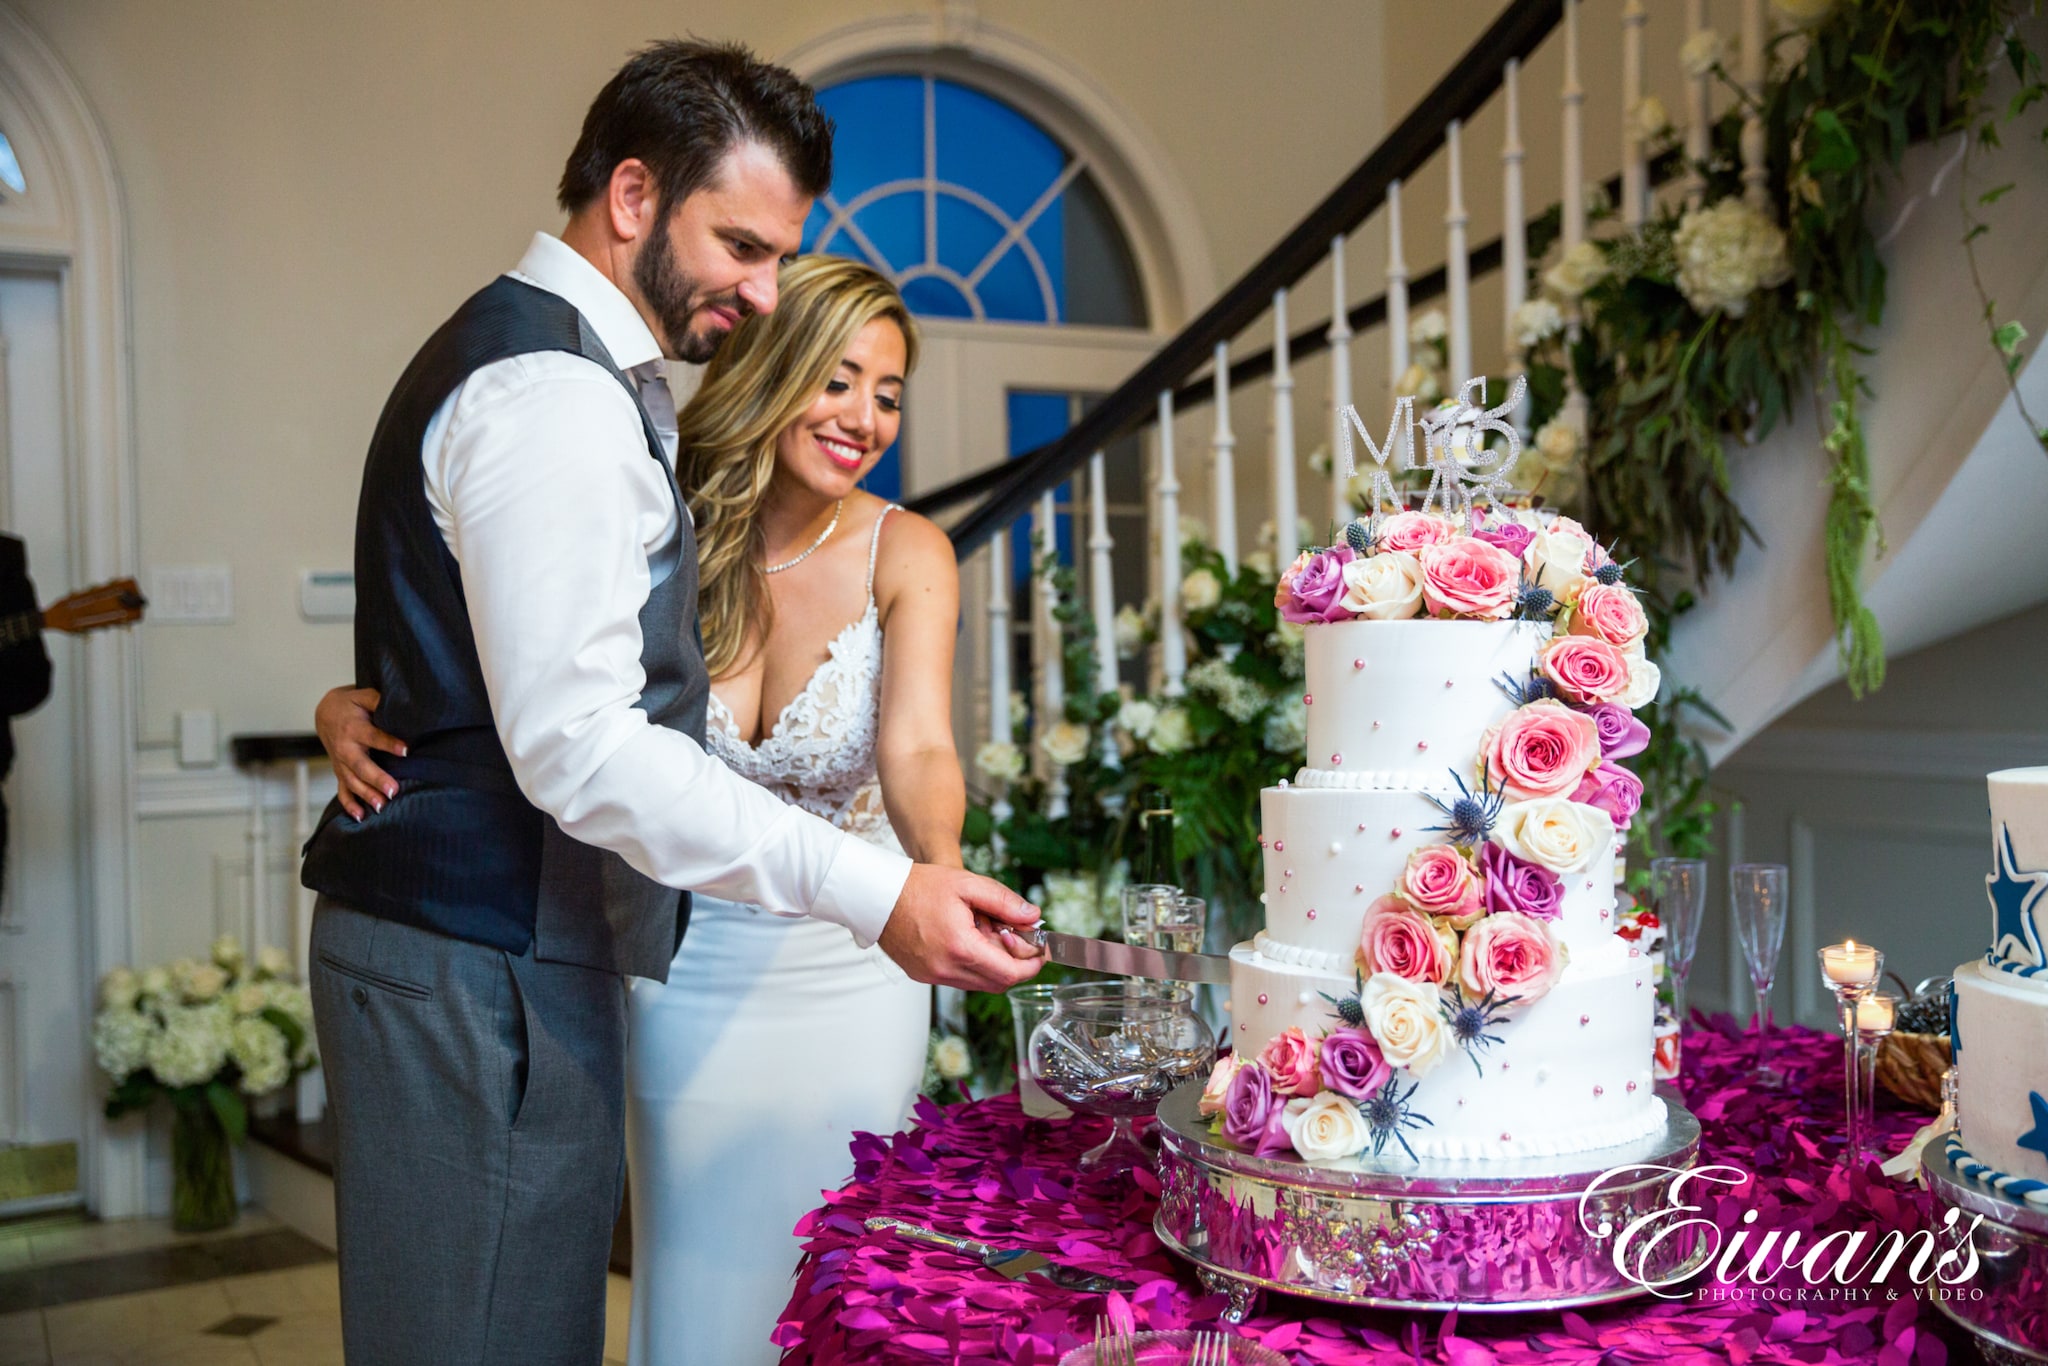 image of a bride and groom cutting the wedding cake